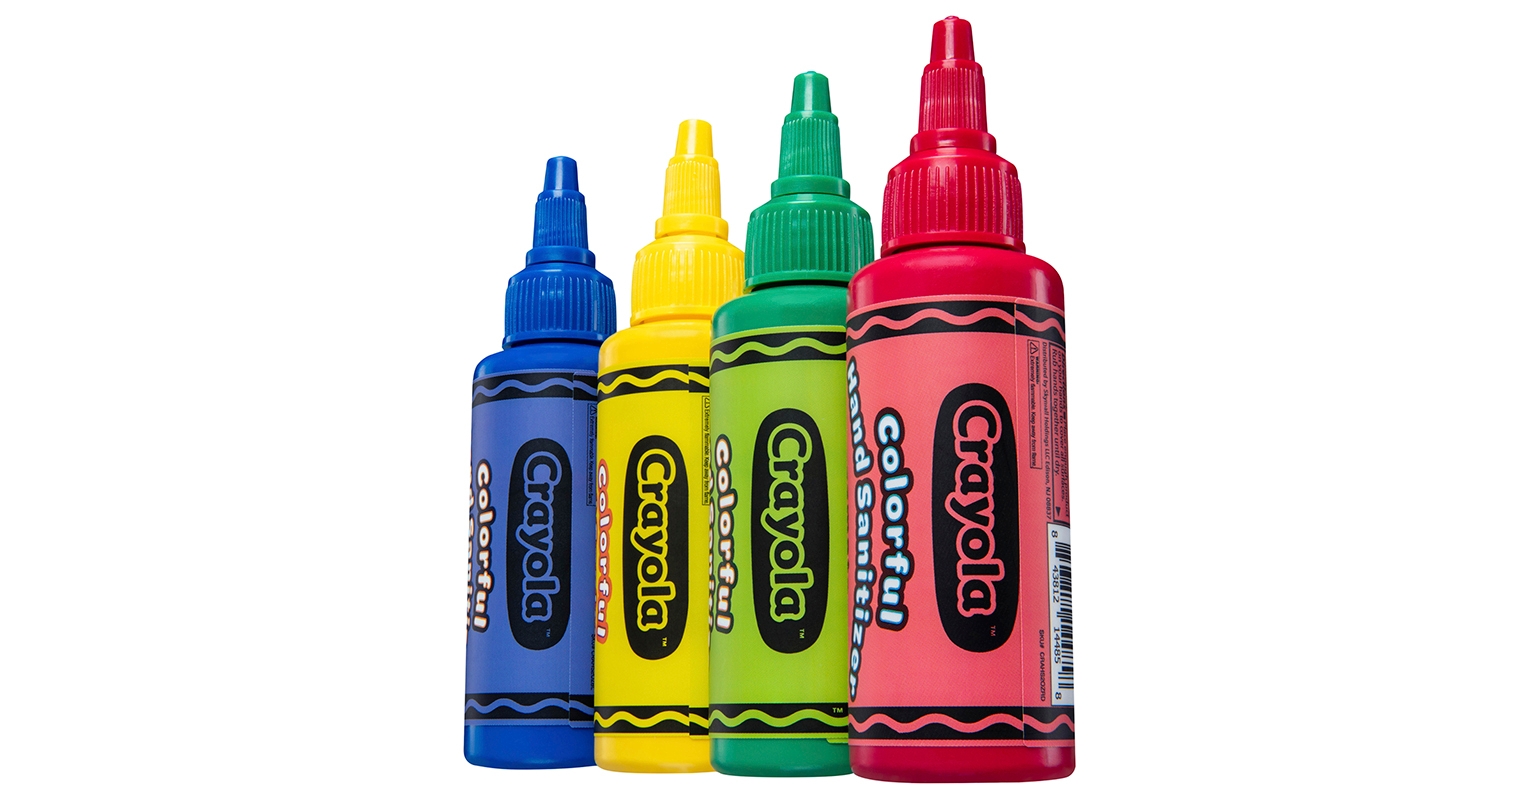 Crayola Packaging Draws Kids' Interest to New Sanitizers